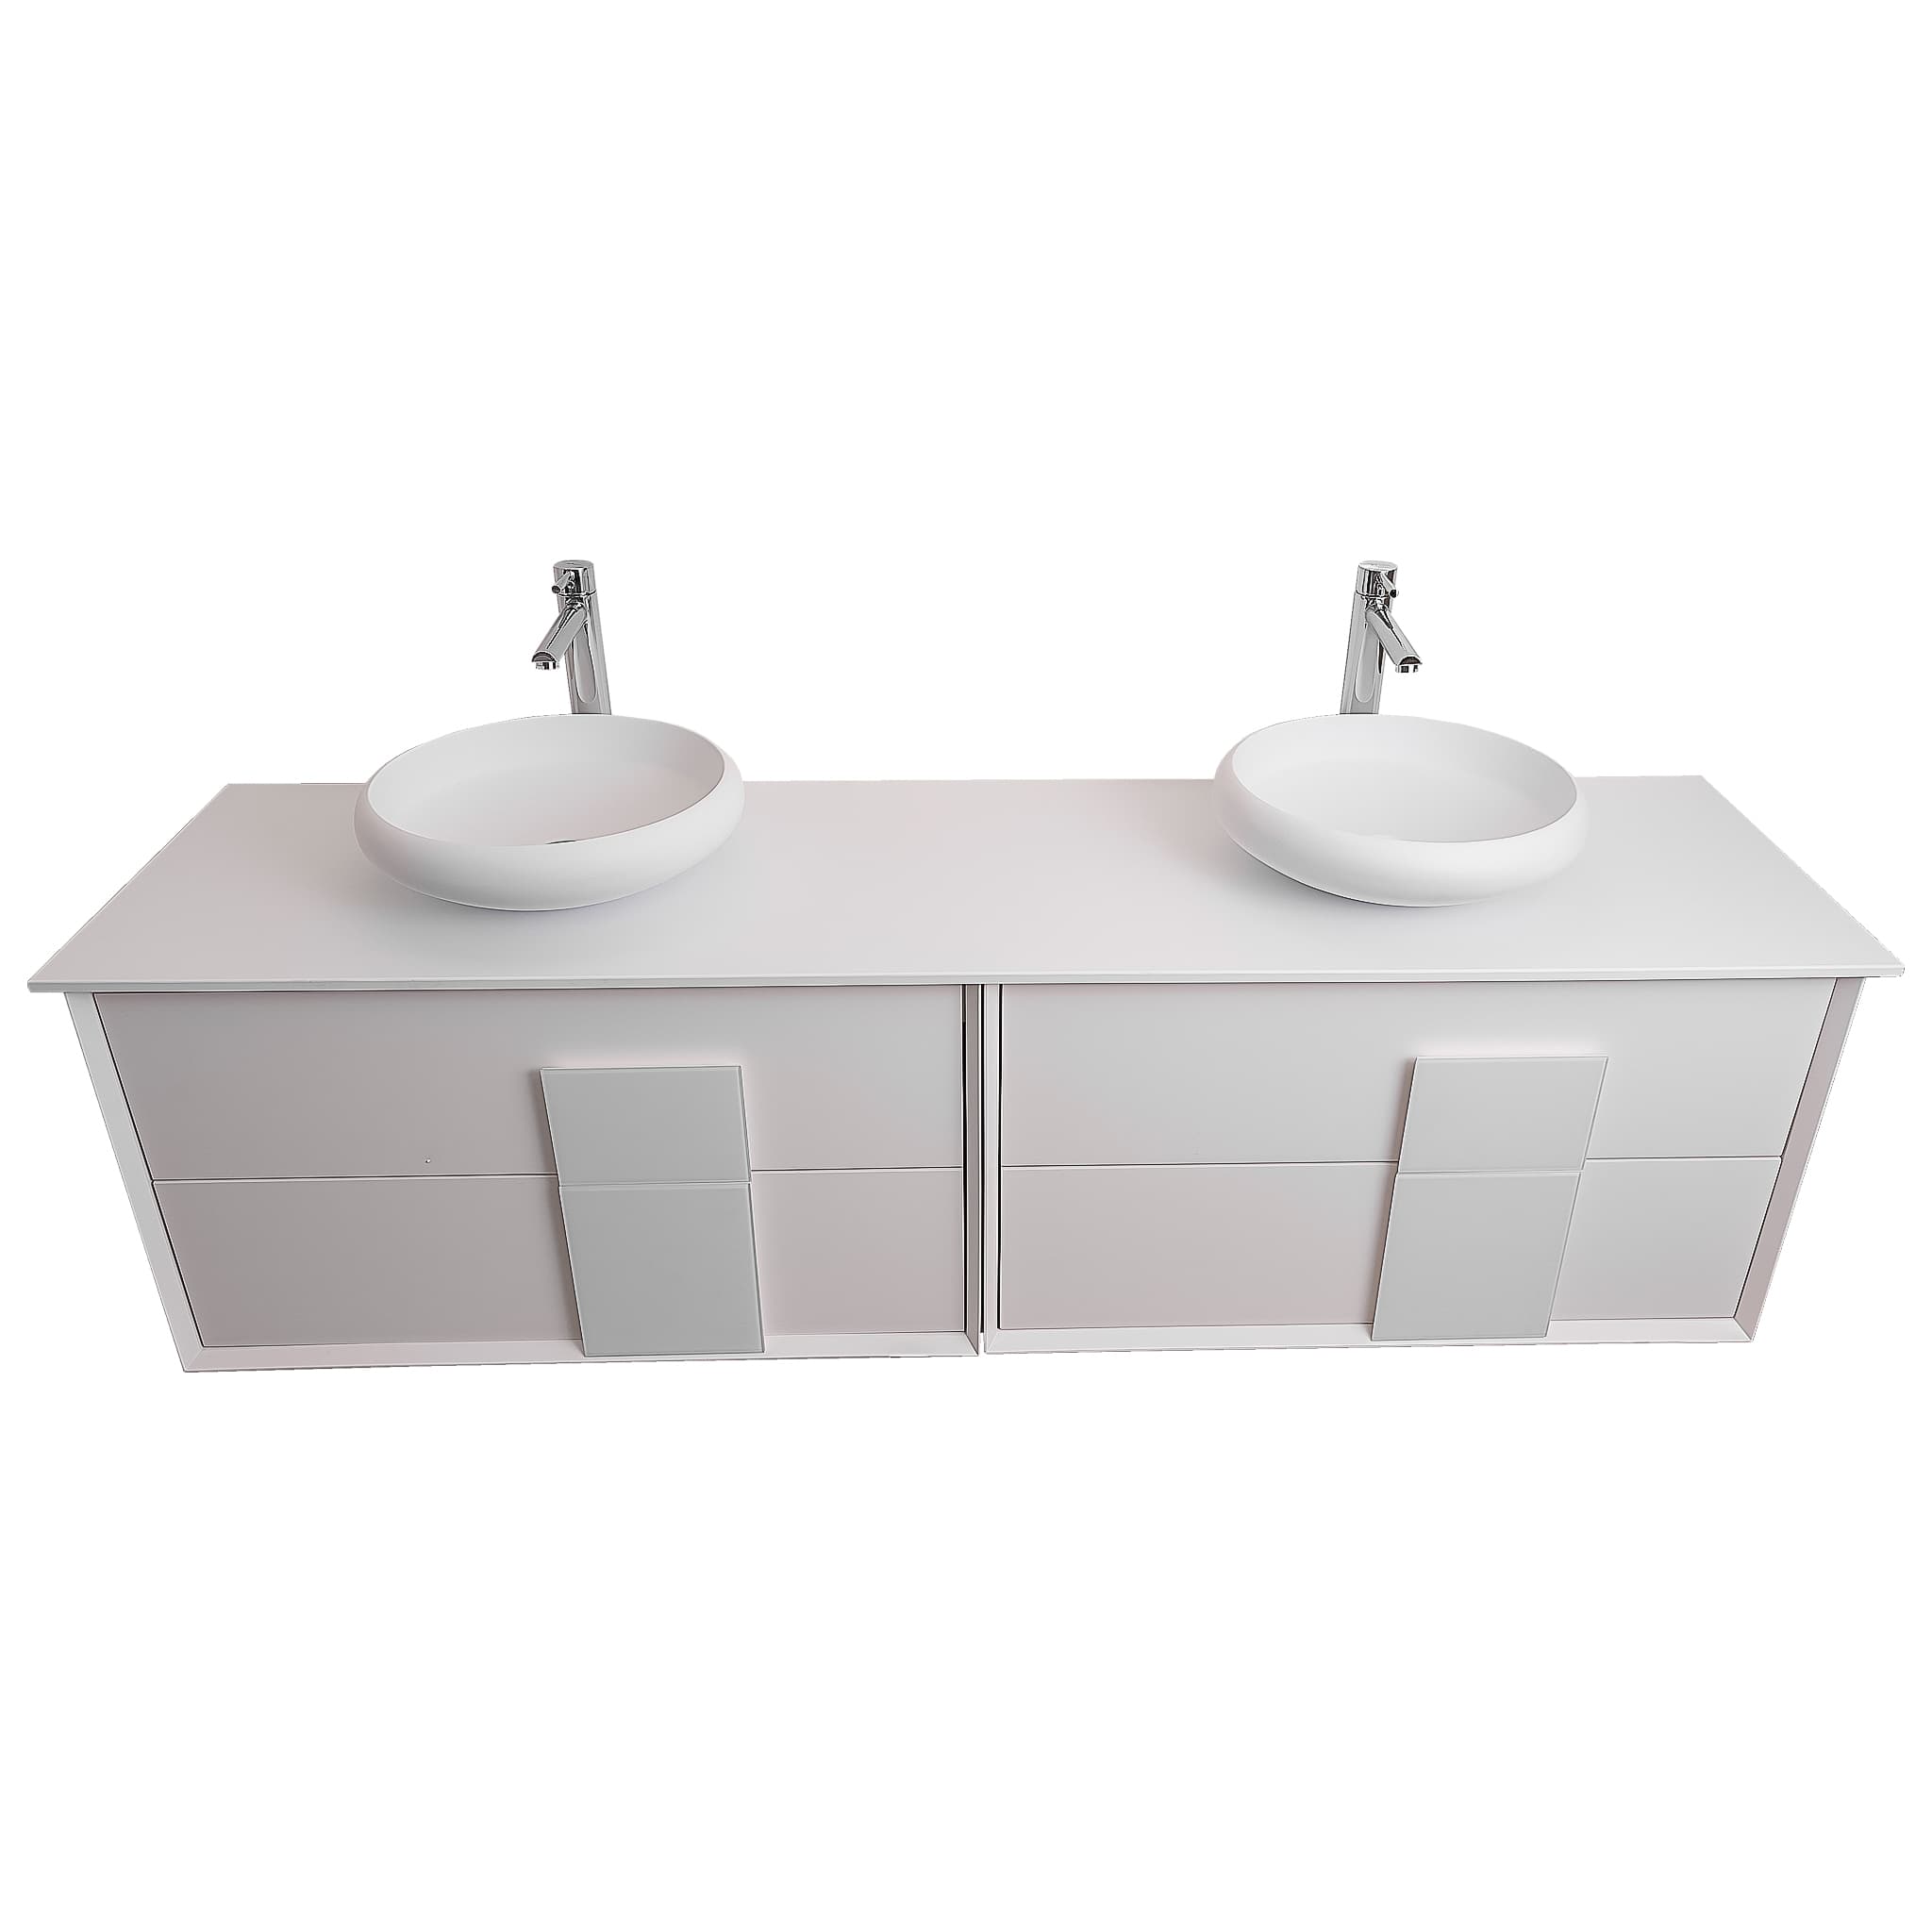 Piazza 63 Matte White With White Handle Cabinet, Solid Surface Flat White Counter and Two Round Solid Surface White Basin 1153, Wall Mounted Modern Vanity Set